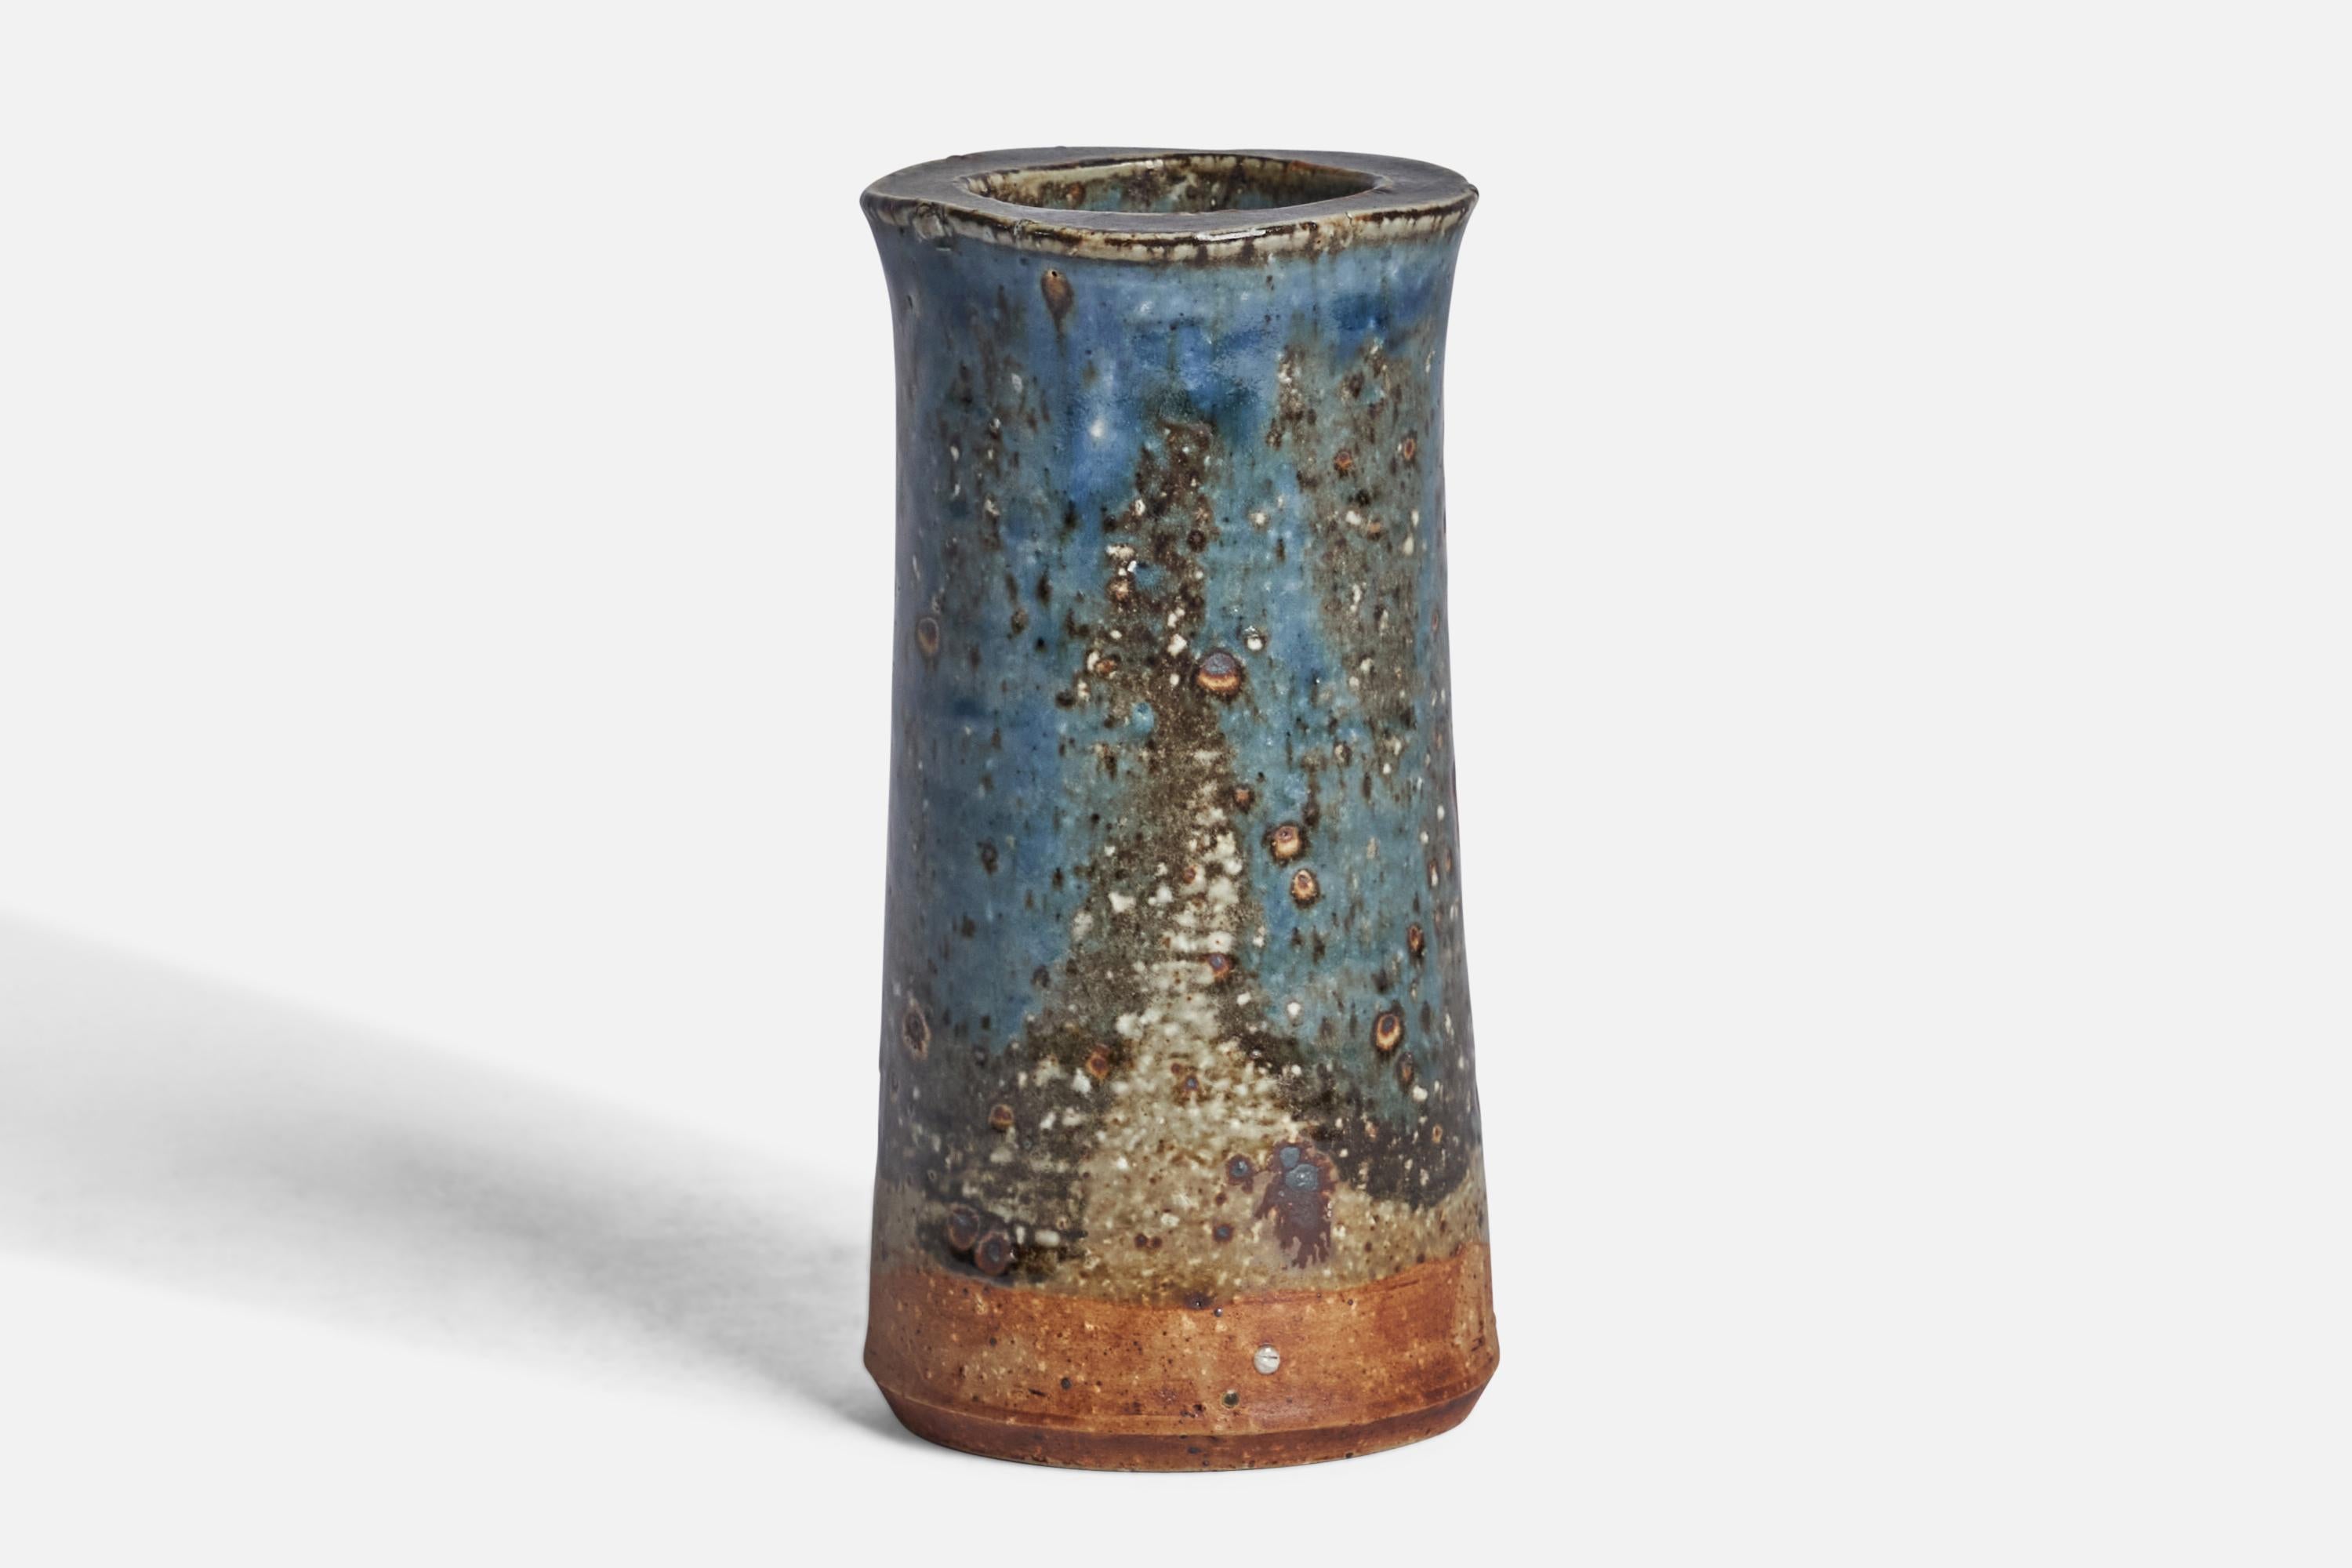 A blue, grey and brown-glazed stoneware vase designed by Marianne Westman and produced by Rörstrand, Sweden, c. 1950s.